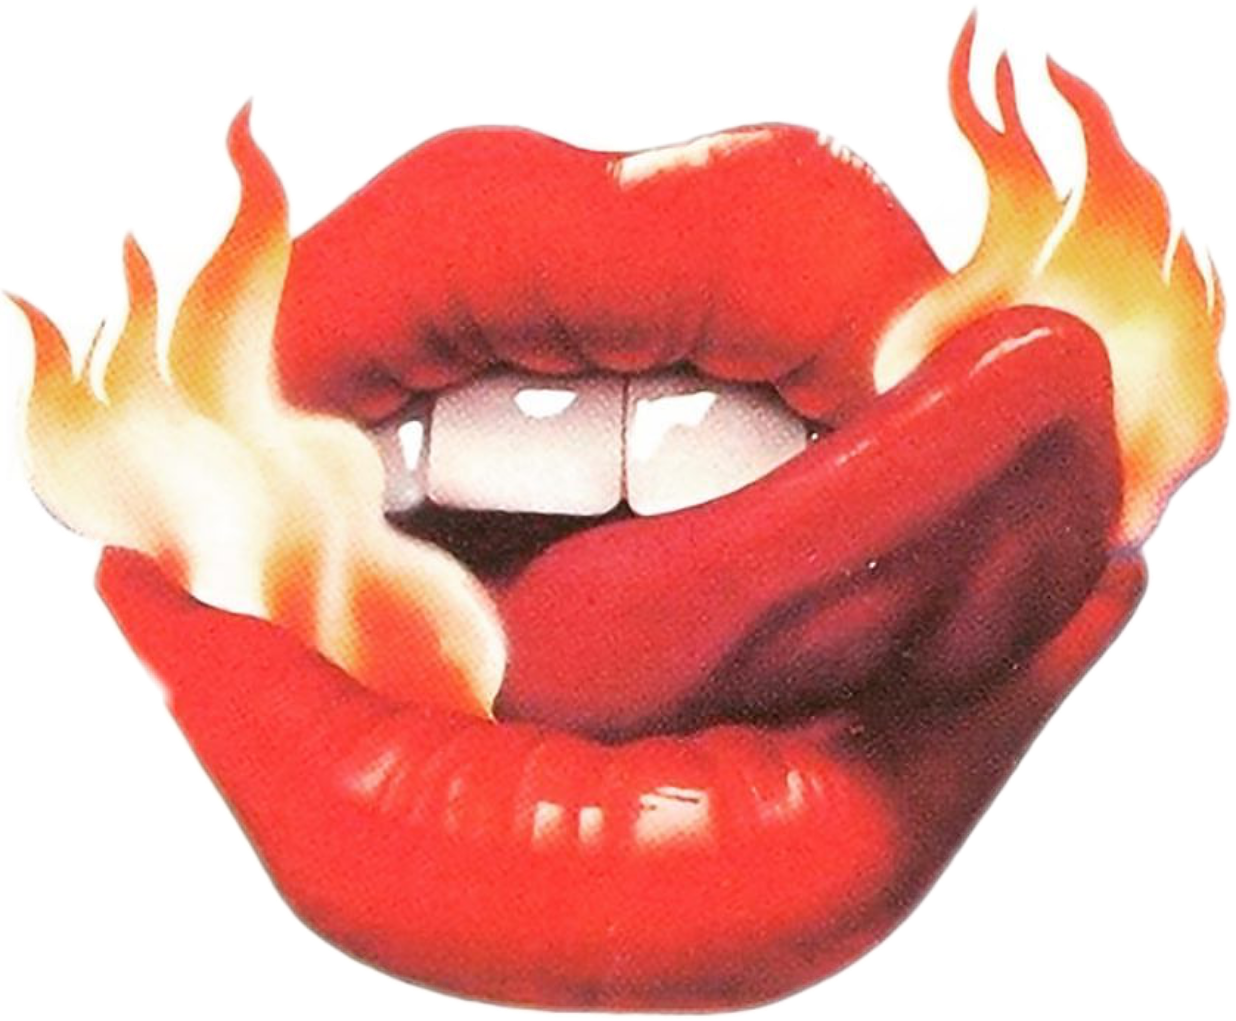 This visual is about lips flames red lickinglips licking freetoedit #lips #...